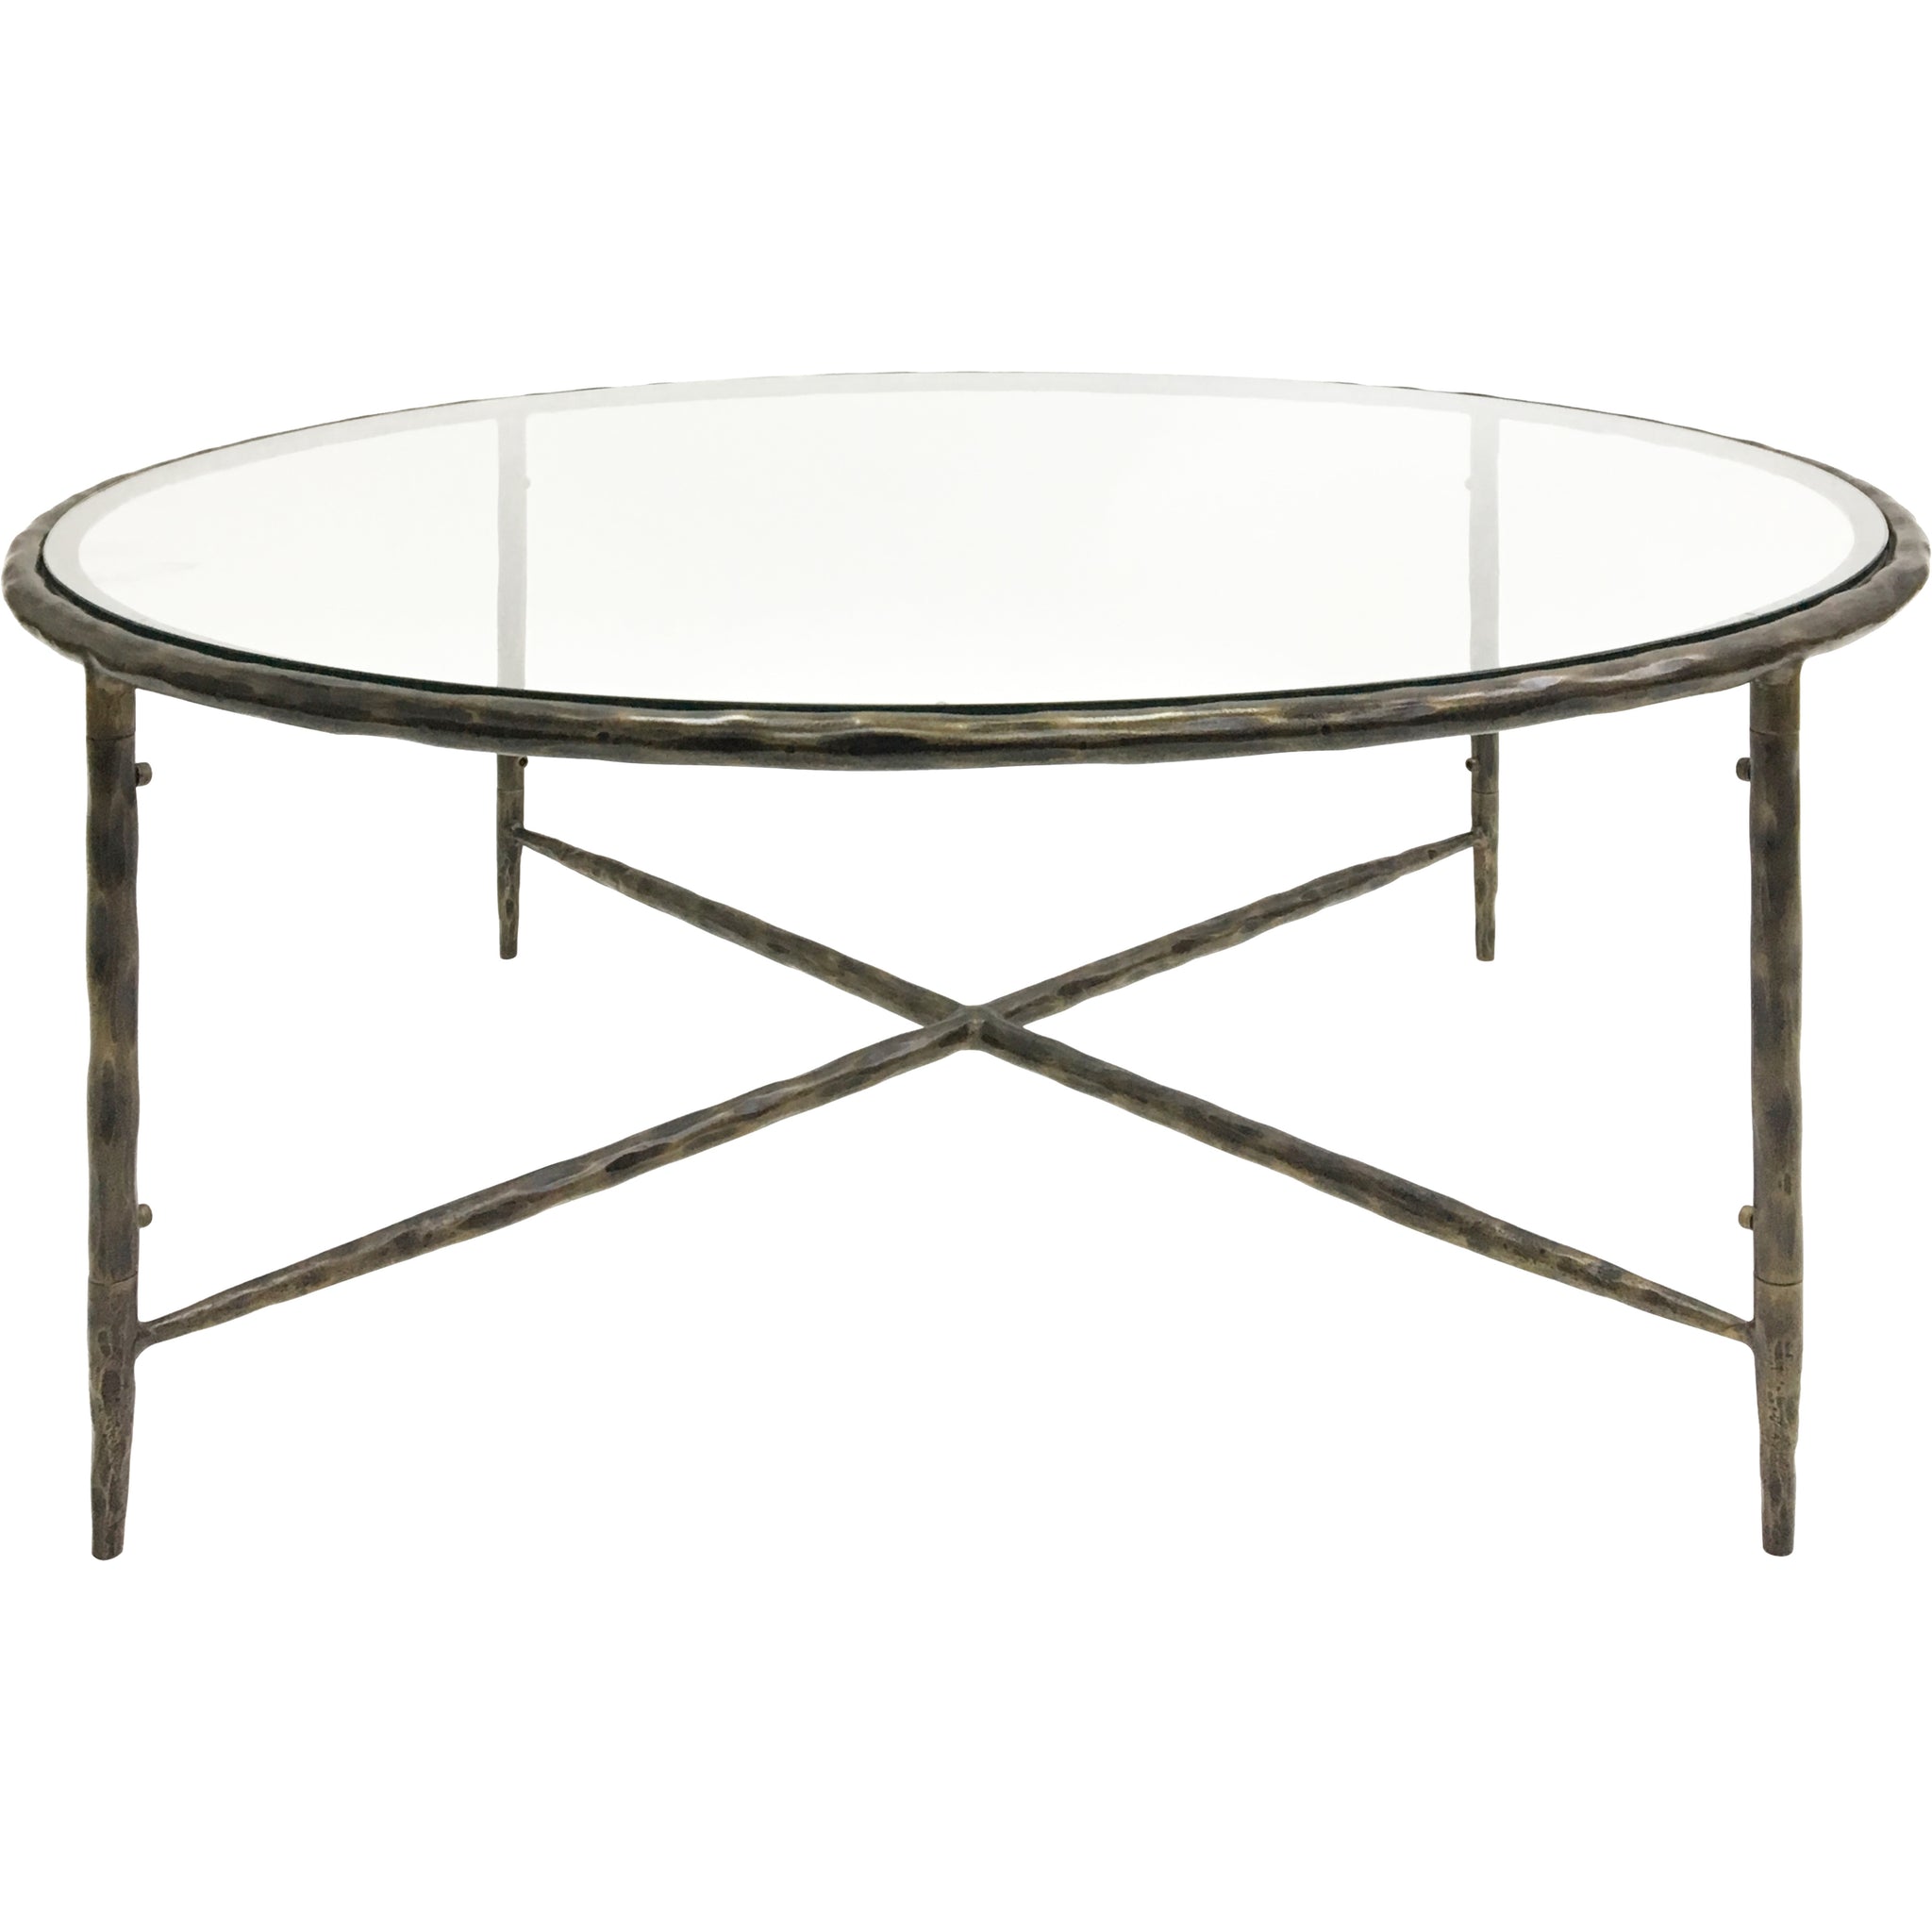 Dalton Hand Forged Round Coffee Table Dark Bronze Finish with Glass Top